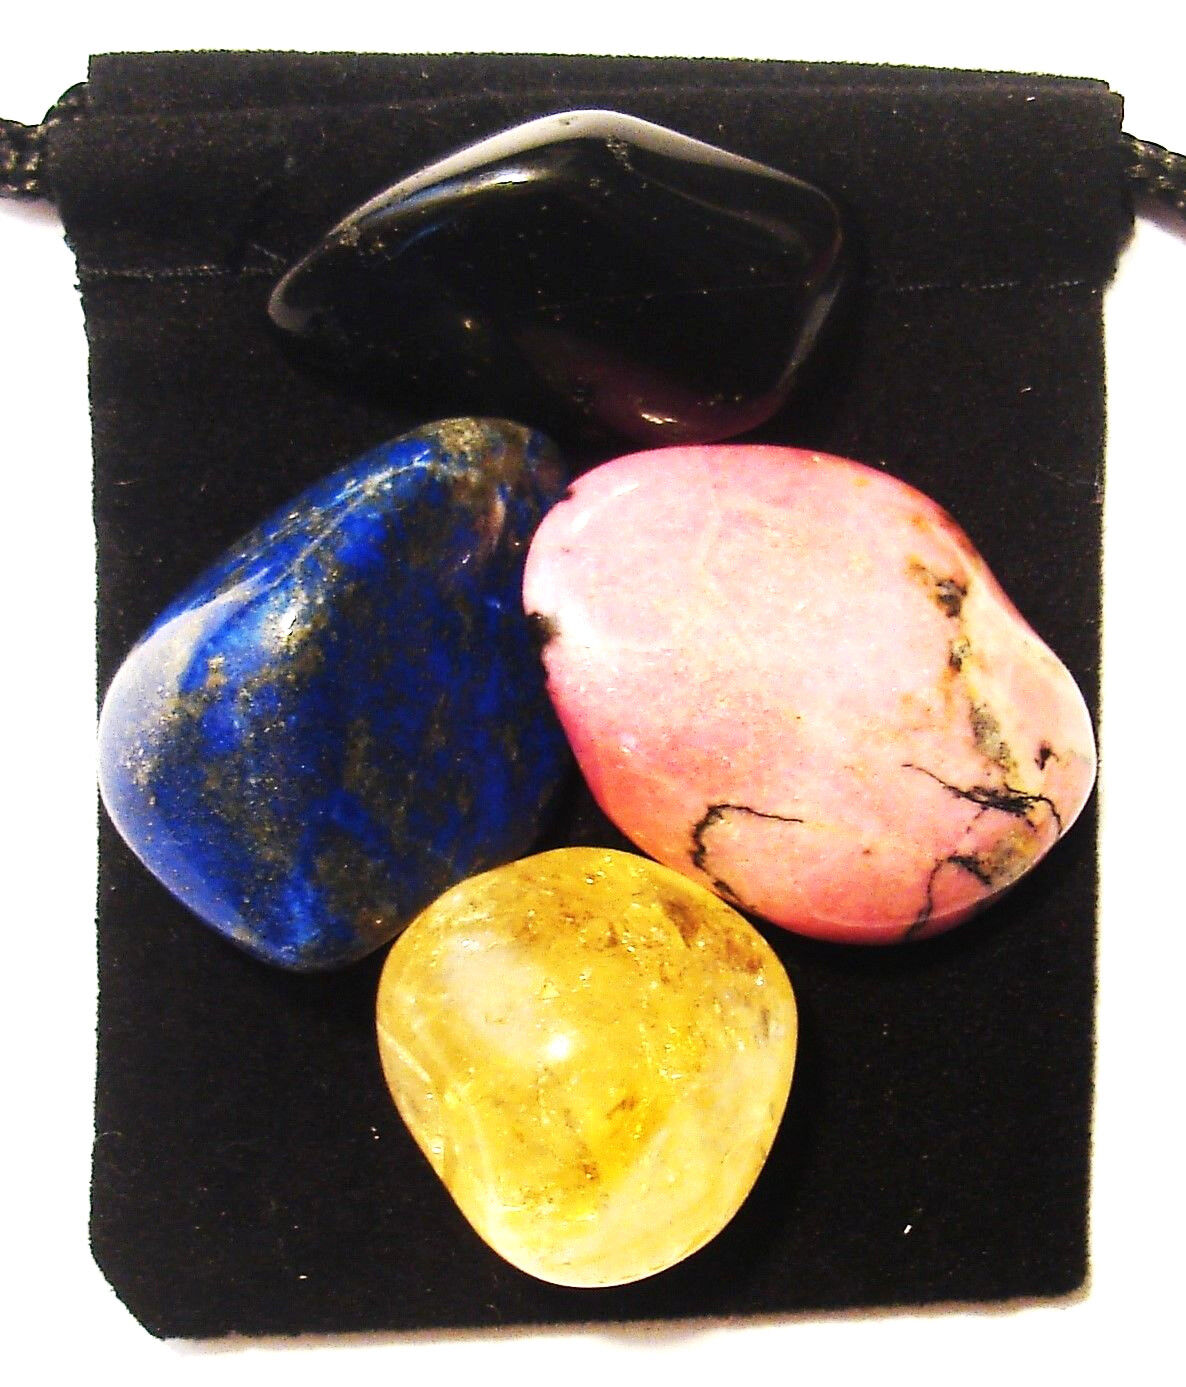 MULTIPLE SCLEROSIS Tumbled Crystal Healing Set = 4 Stones + Pouch + Card